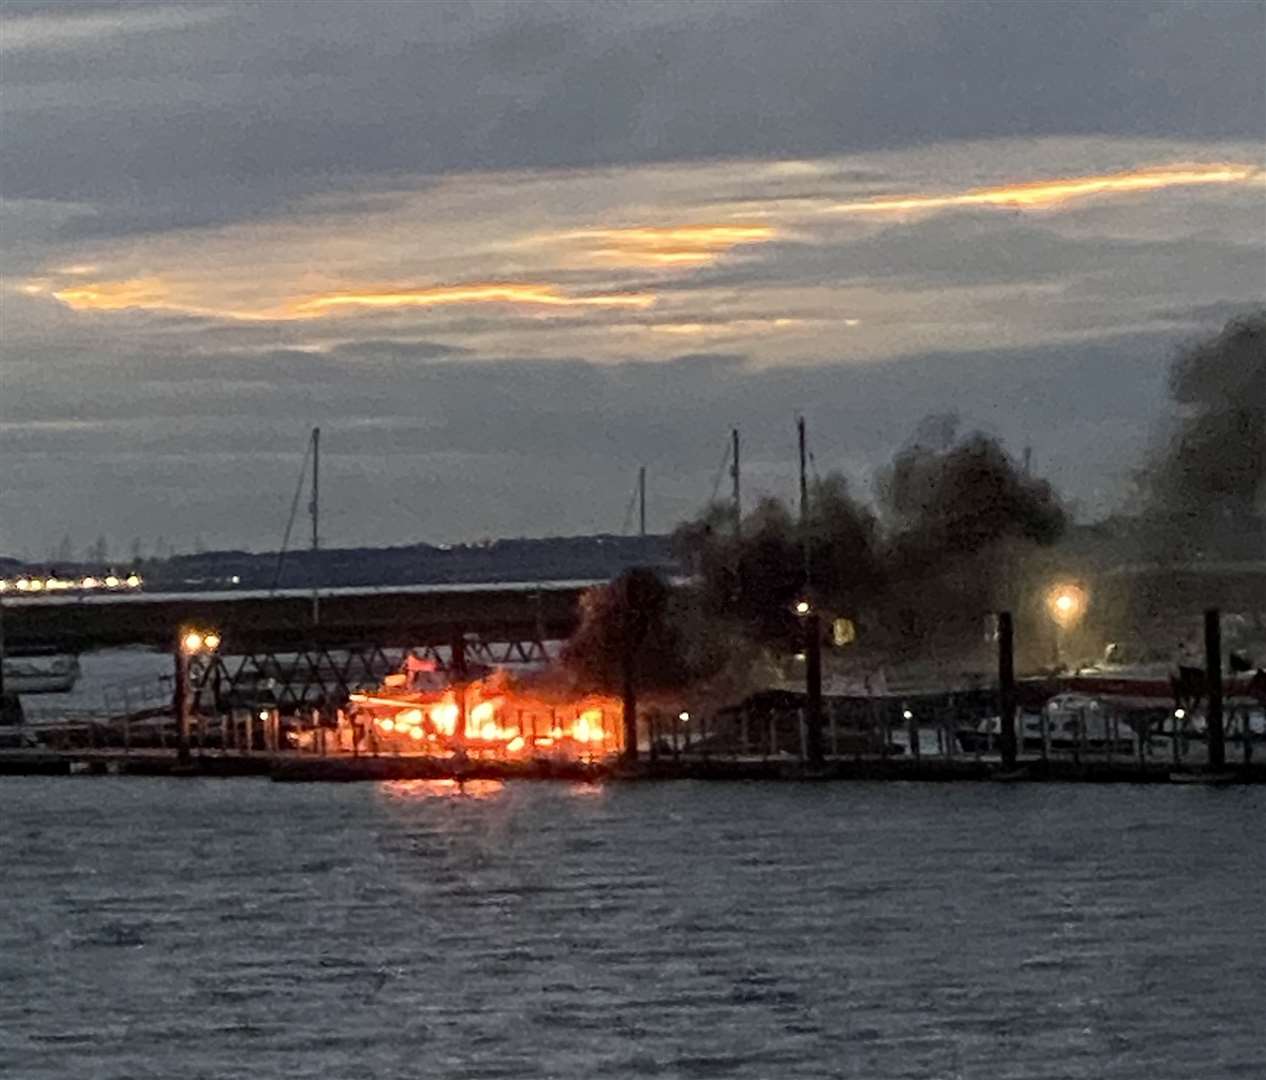 The boat was engulfed in flames after it exploded at Queenborough marina. Picture: Simon Fowle